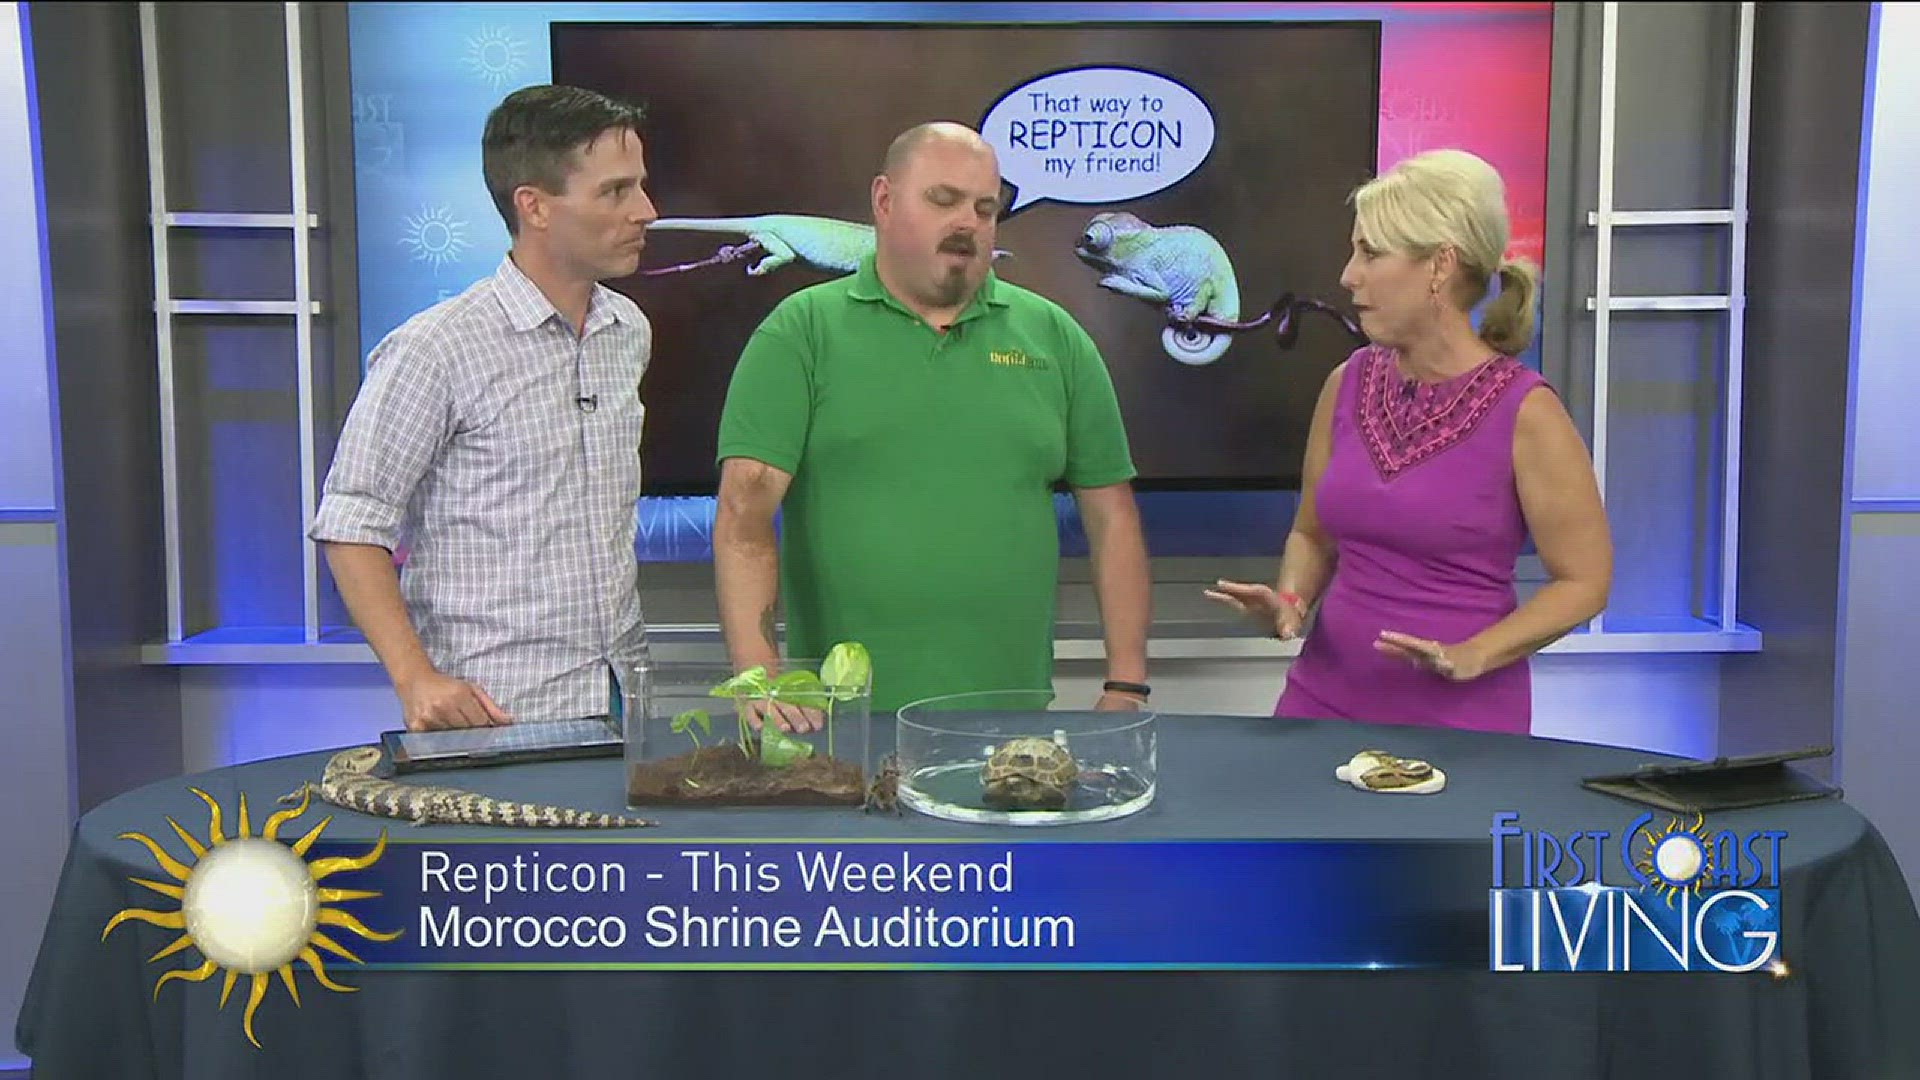 Repticon is this weekend at the Morocco Shrine Auditorium.